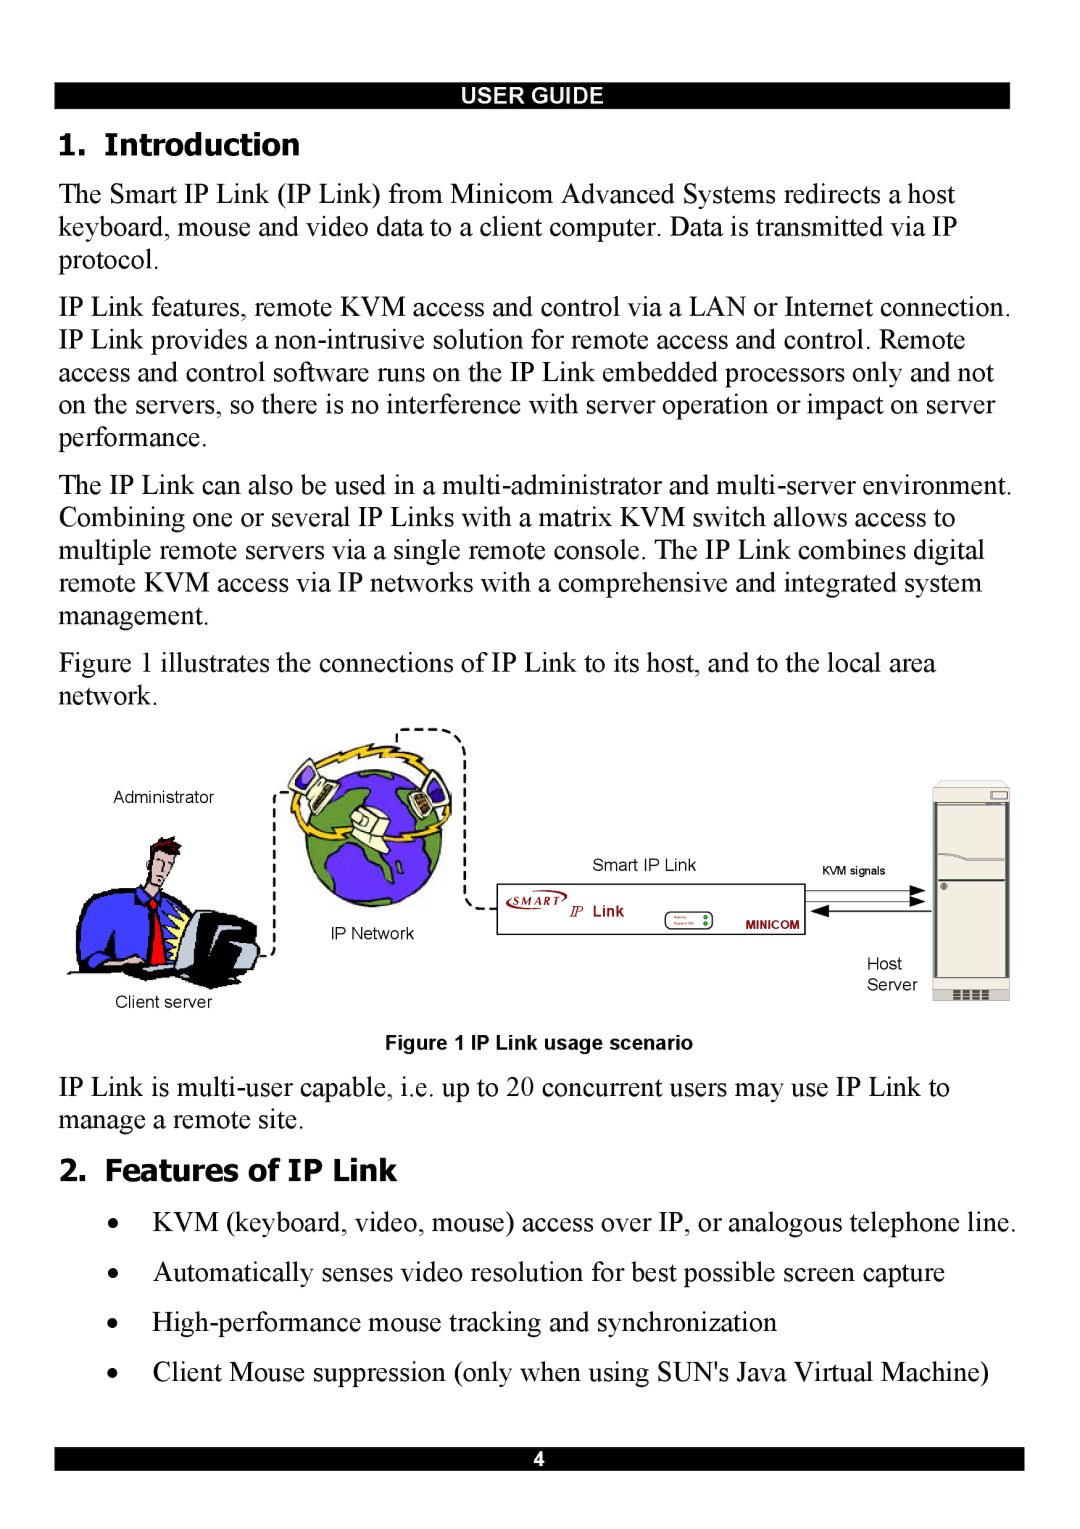 Minicom Advanced Systems RJ-45 manual Introduction, Features of IP Link 